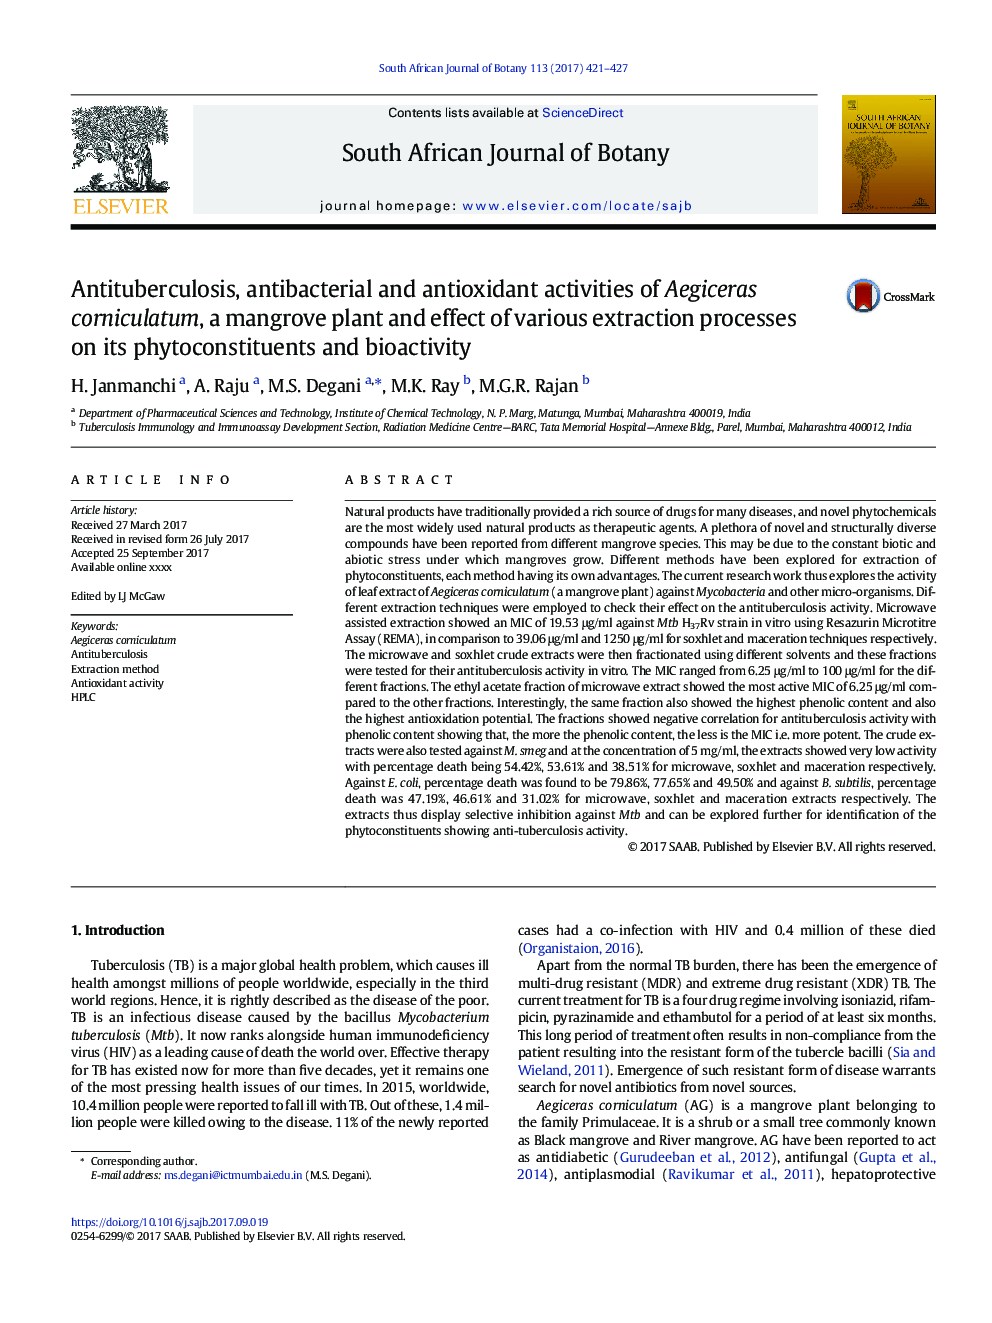 Antituberculosis, antibacterial and antioxidant activities of Aegiceras corniculatum, a mangrove plant and effect of various extraction processes on its phytoconstituents and bioactivity